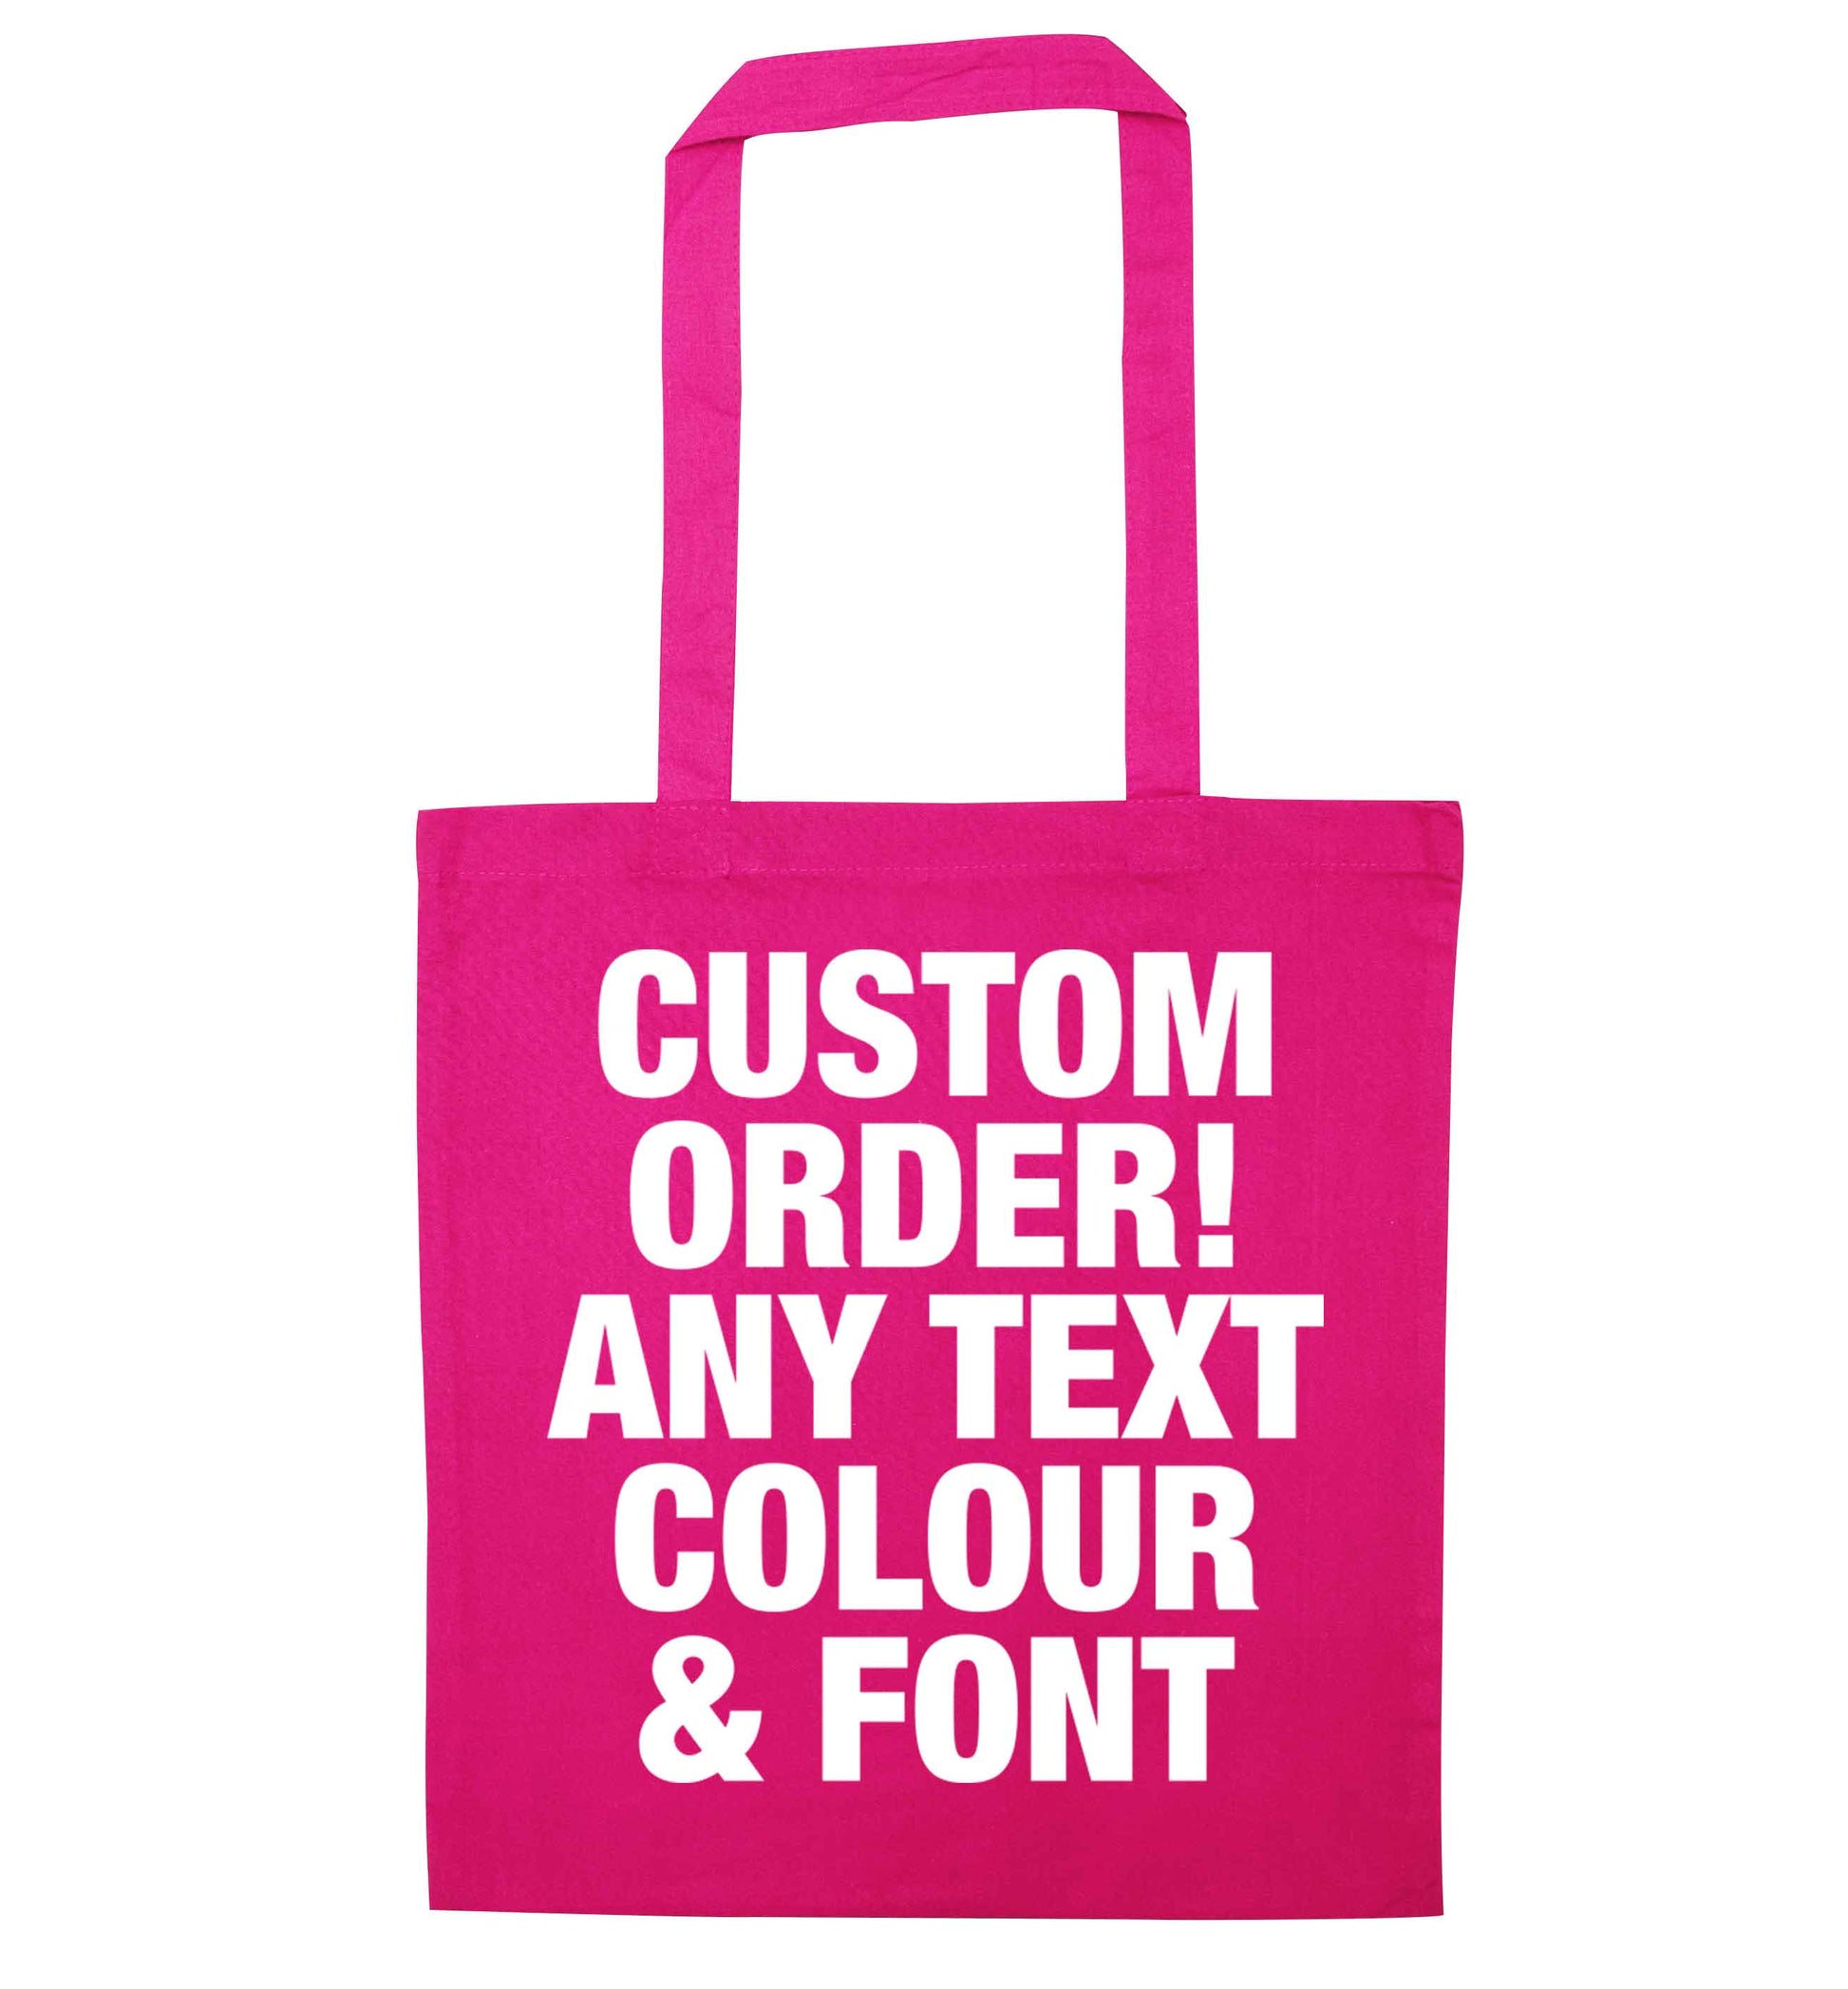 Custom order any text colour and font pink tote bag